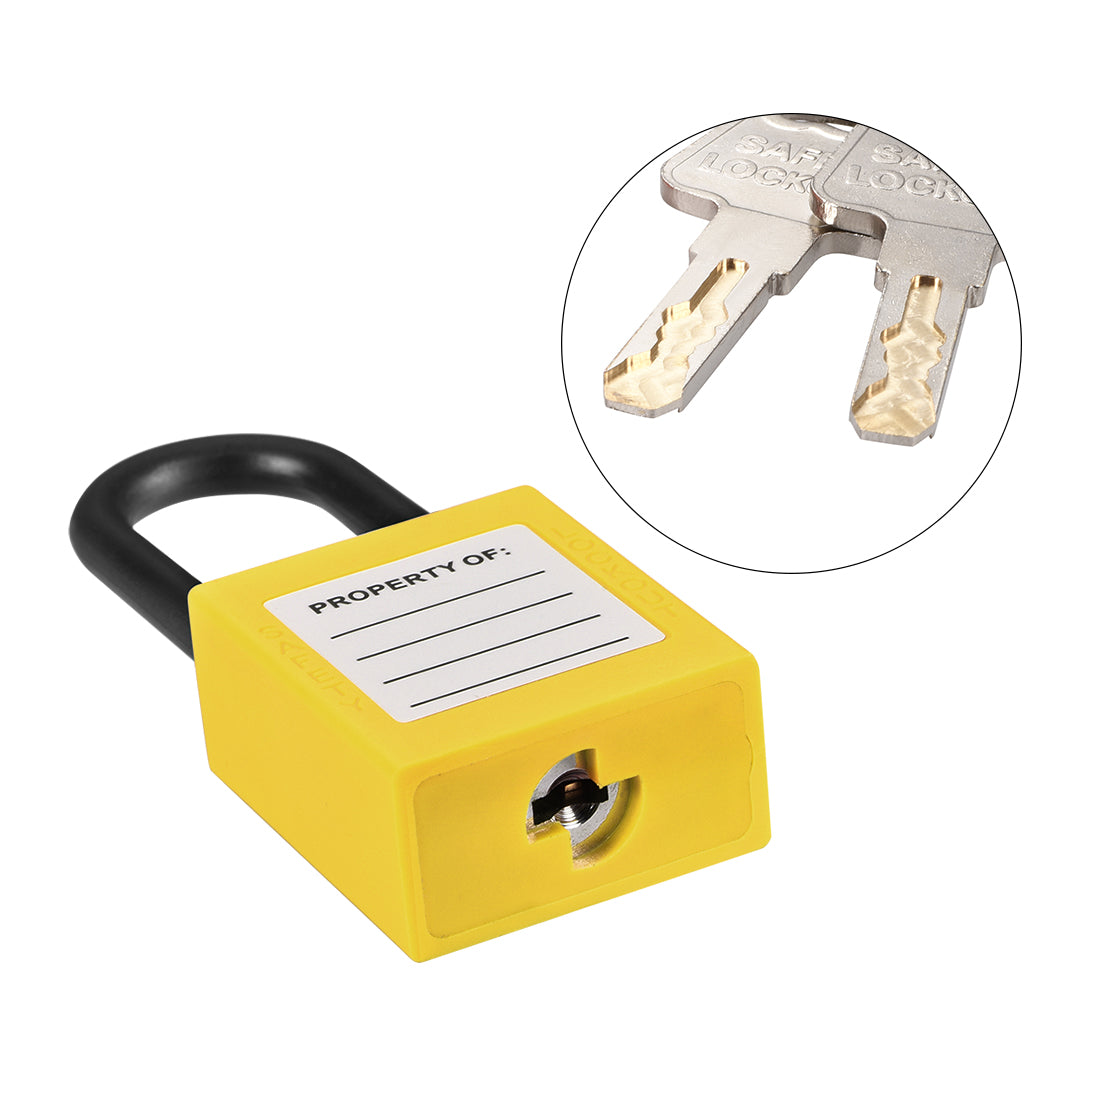 uxcell Uxcell Lockout Tagout Safety Padlock 38mm Nylon Shackle Keyed Different Yellow 2Pcs